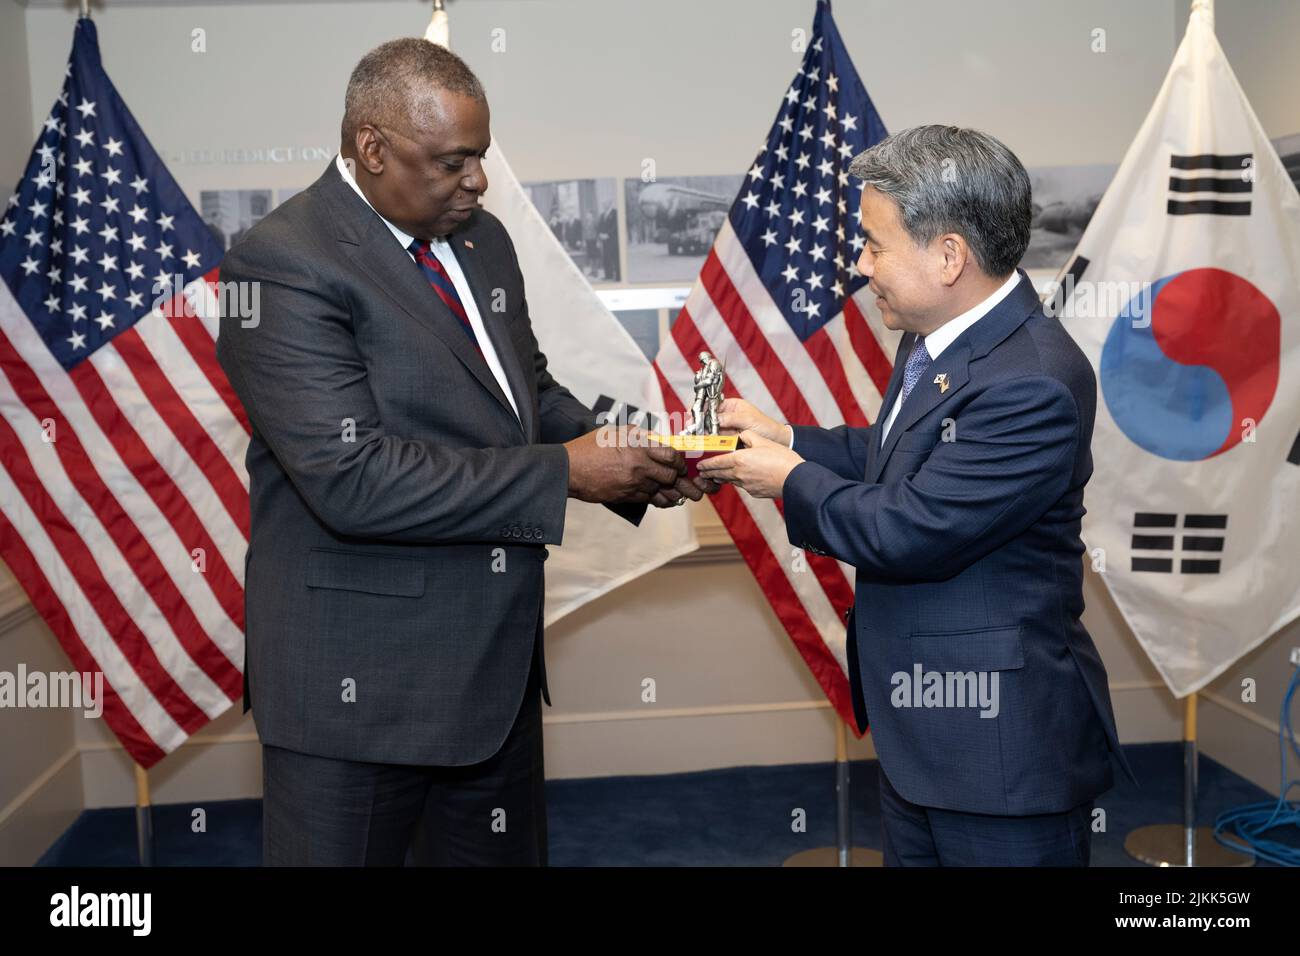 Arlington, United States of America. 29 July, 2022. South Korean Minister of National Defense Lee Jong-sup, right, presents a gift to U.S. Secretary of Defense Lloyd J. Austin III, before the state of bilateral talks at the Pentagon, July 29, 2022 in Arlington, Virginia.  Credit: Lisa Ferdinando/DOD/Alamy Live News Stock Photo